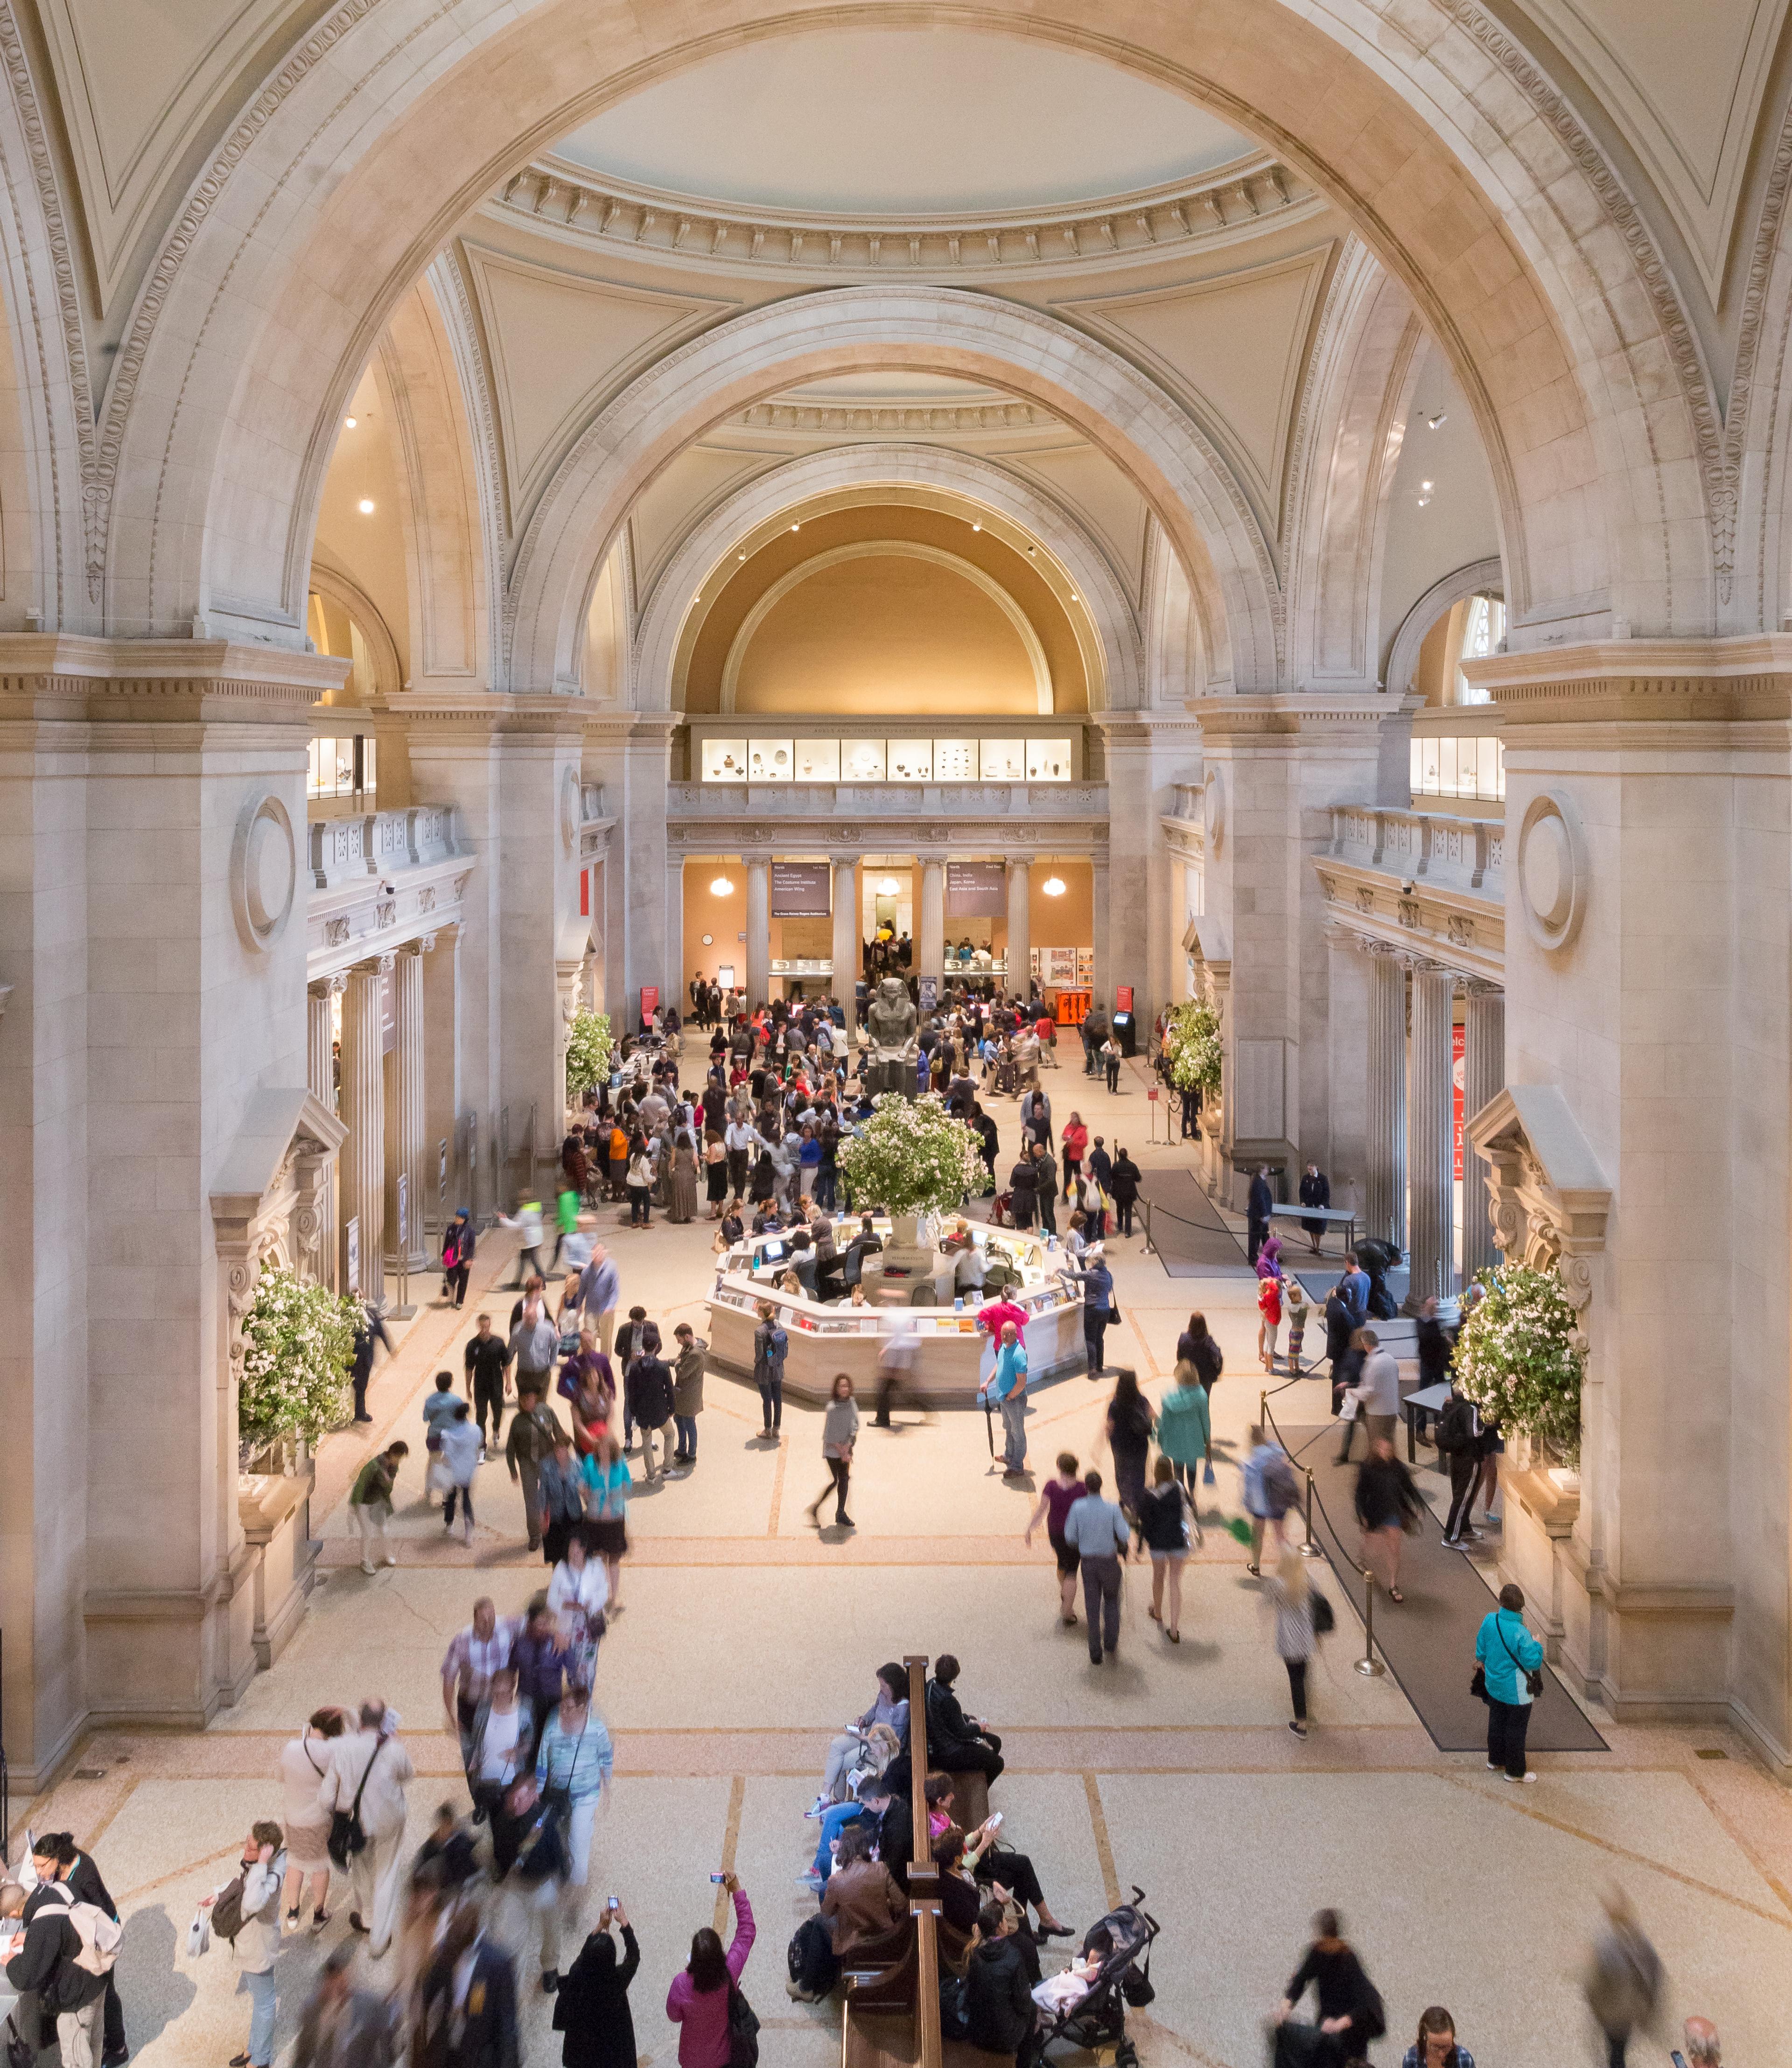 The Met's Great Hall filled with crowds captured in movement.